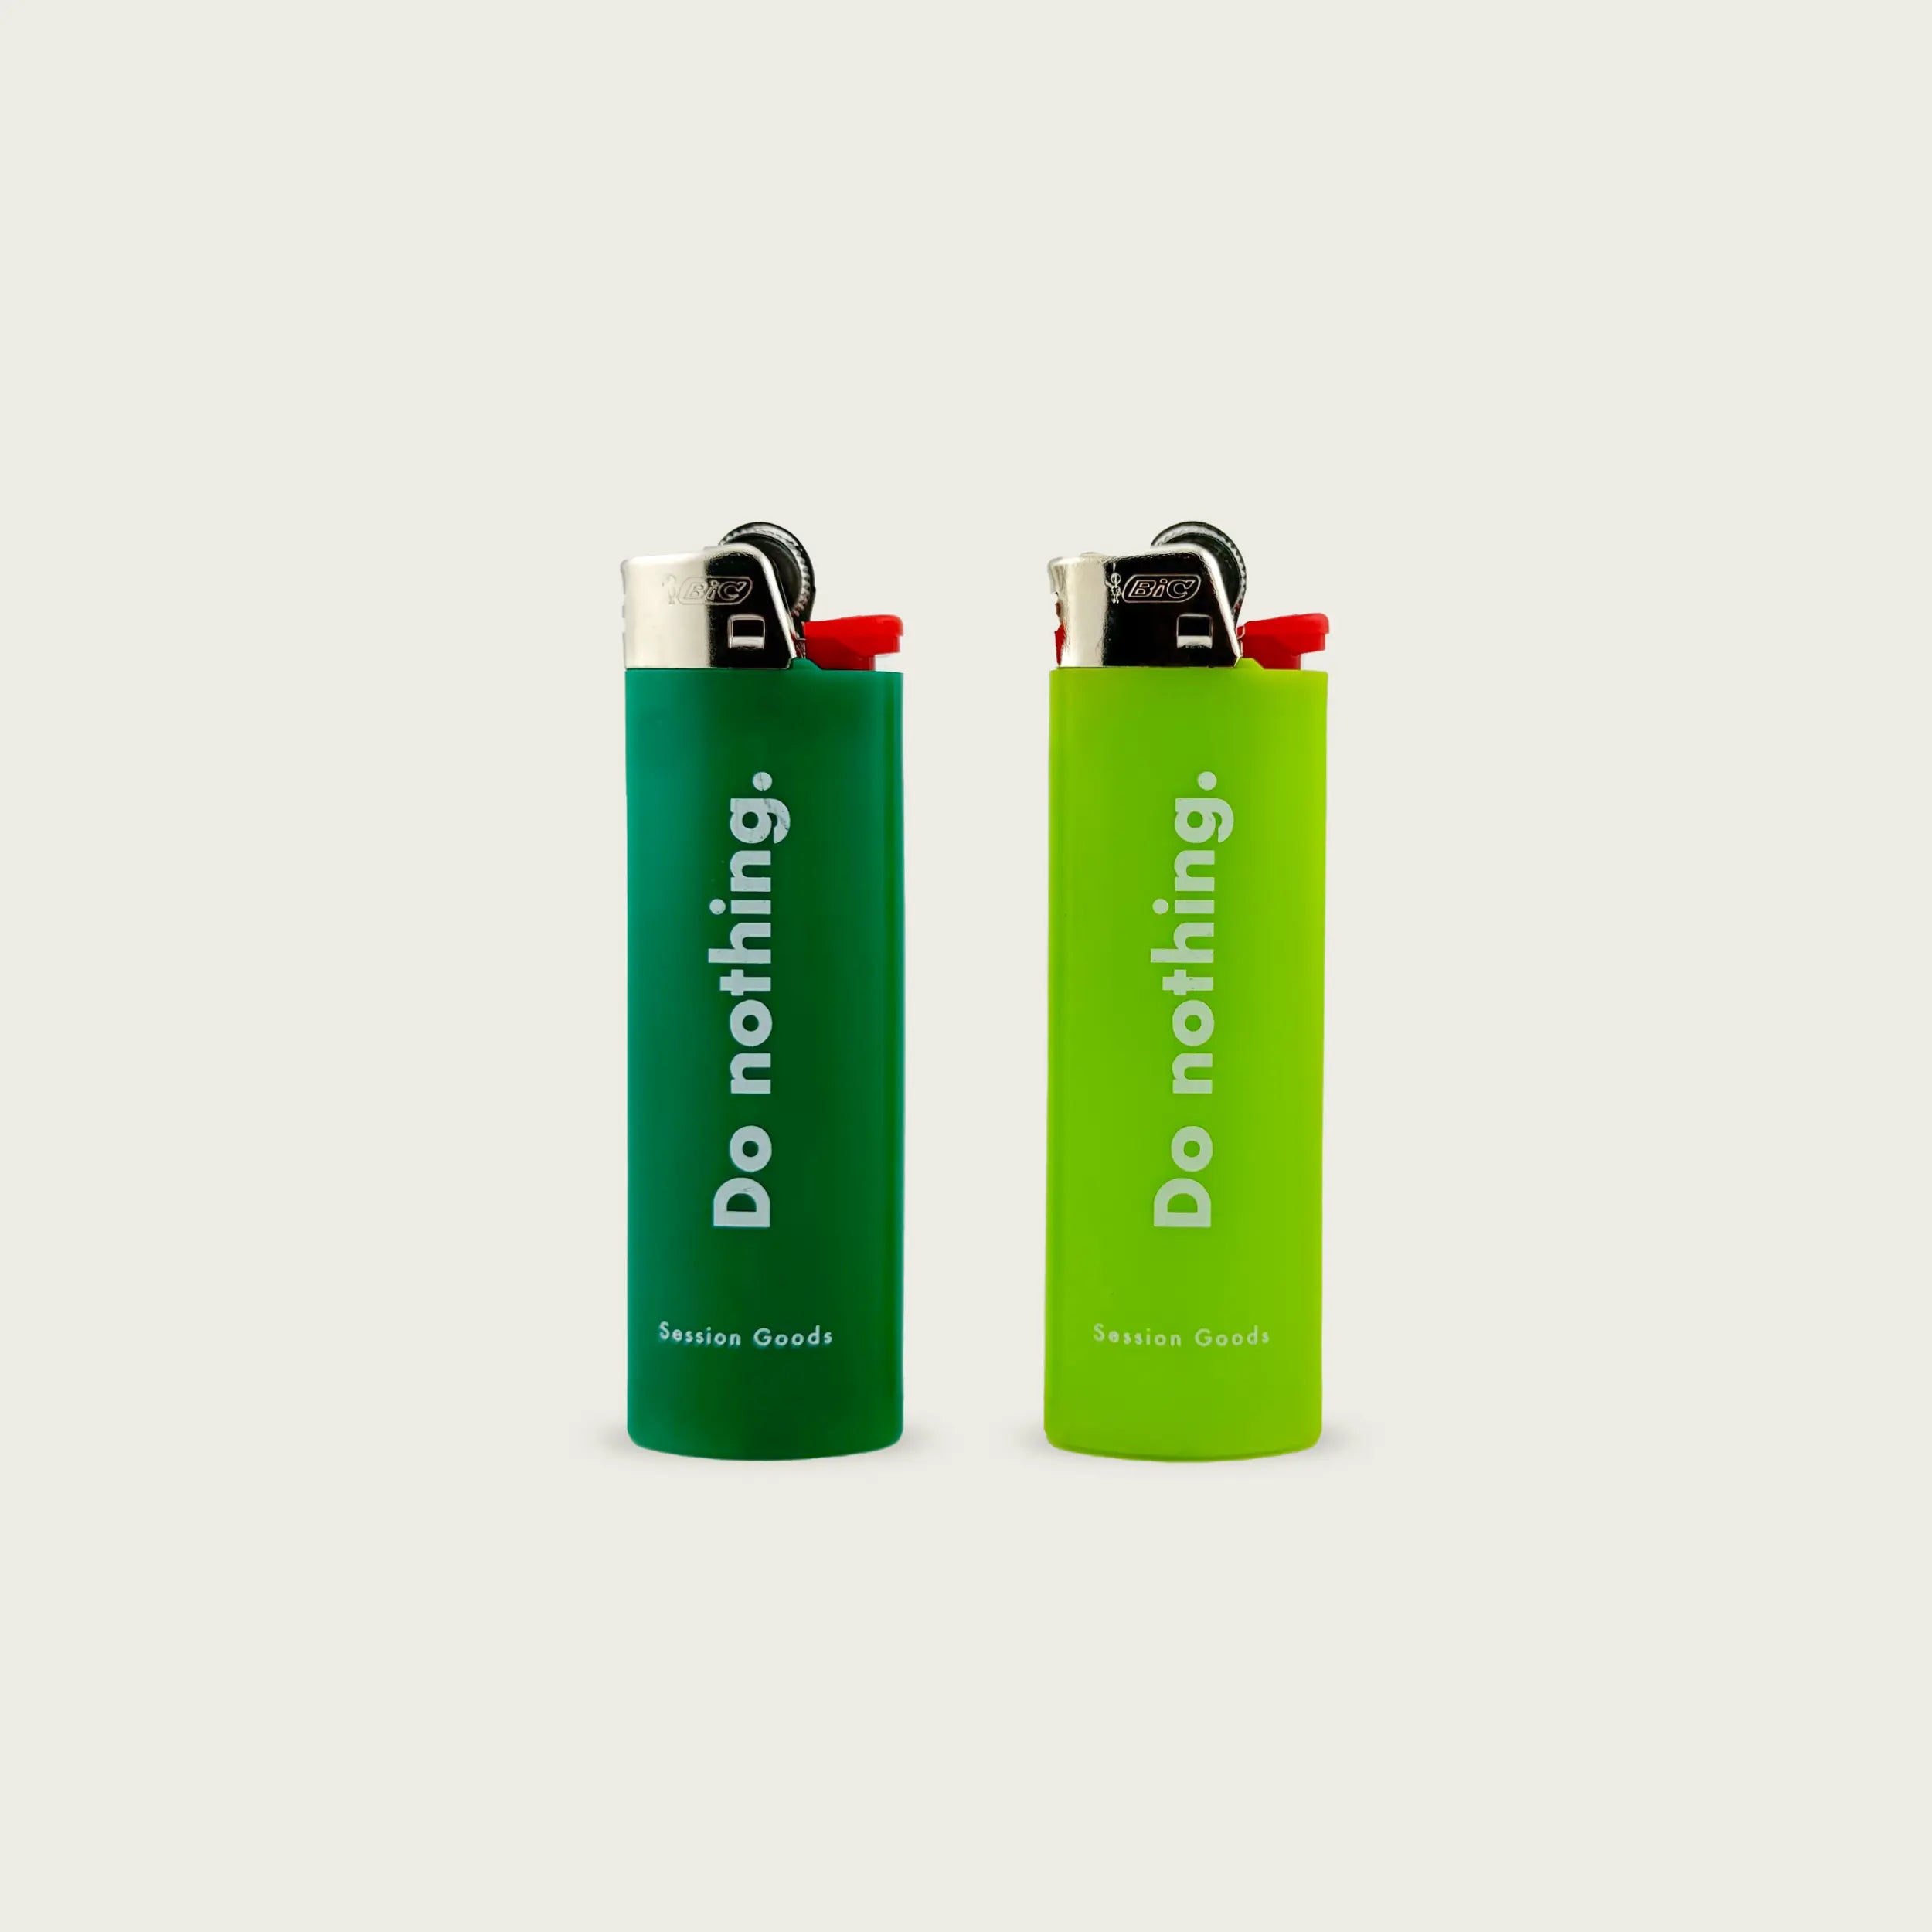 Do Nothing.™ Big Green Lighter 2-Pack by Session Goods